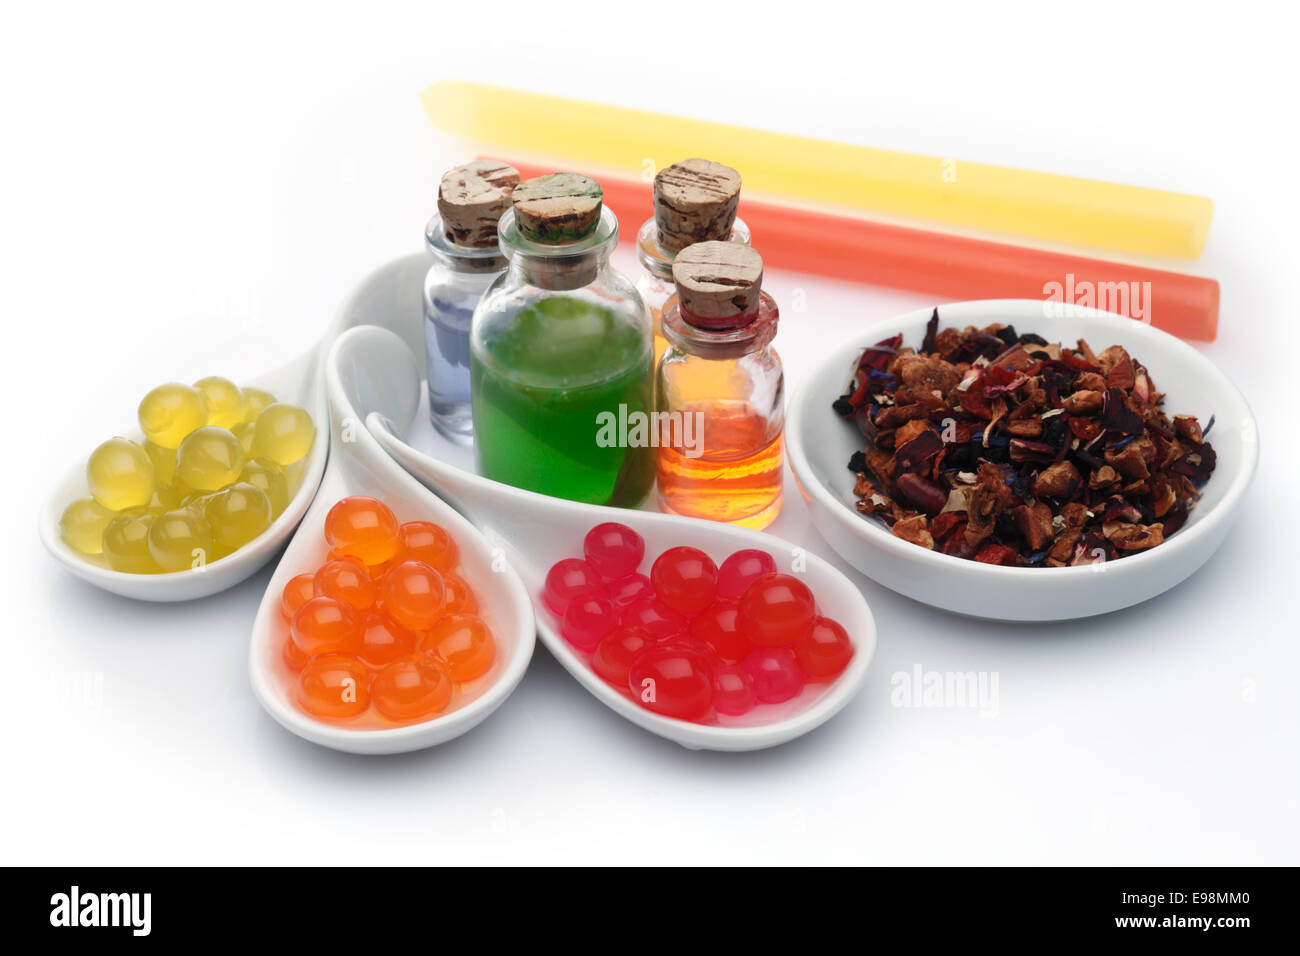 Boba bubble tea ingredients arrangement with assorted syrup and pearls Stock Photo